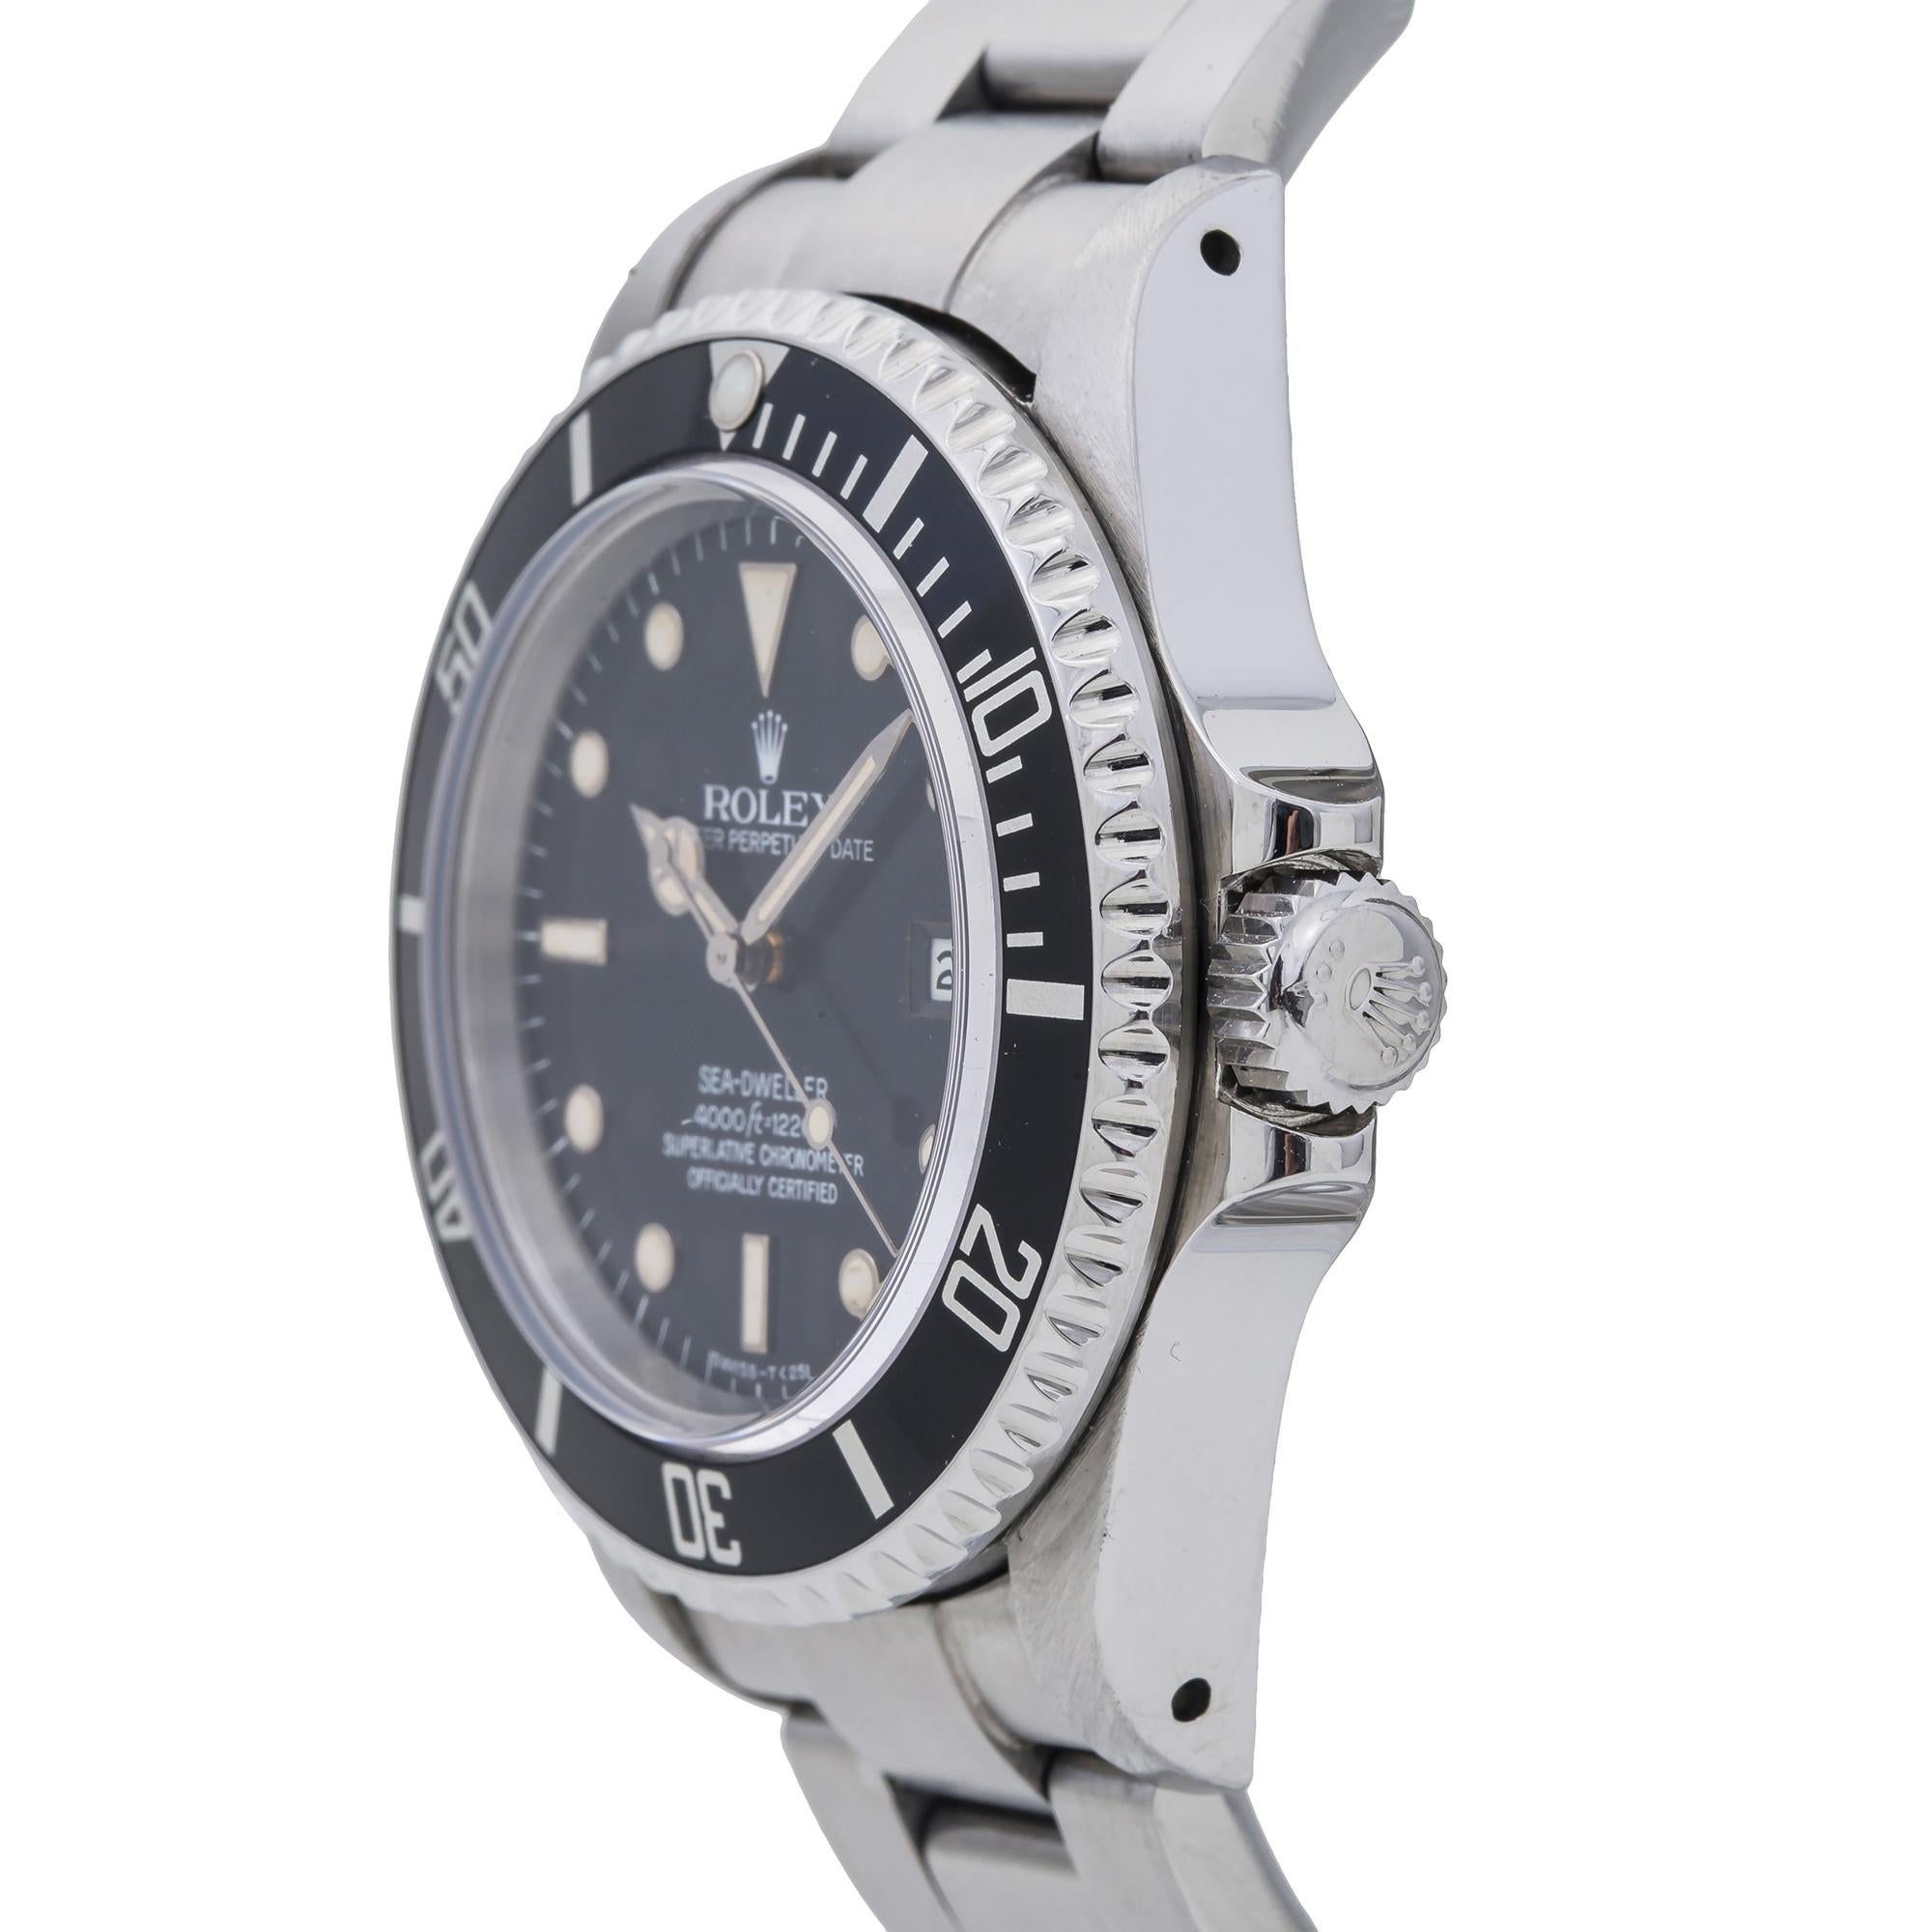 Contemporary Rolex Sea-Dweller 16660, Black Dial, Certified and Warranty For Sale